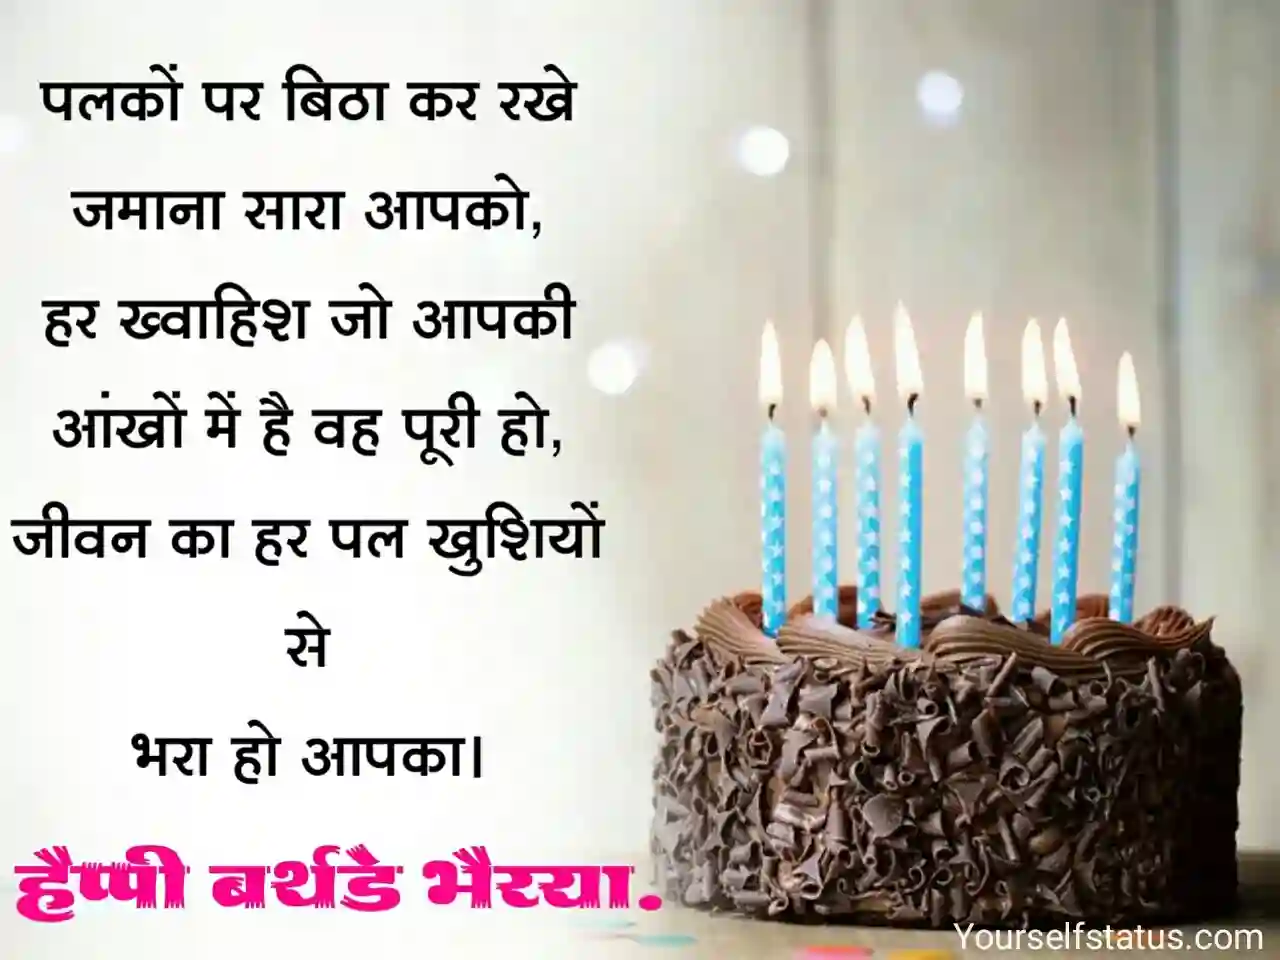 Birthday messages for brother in hindi